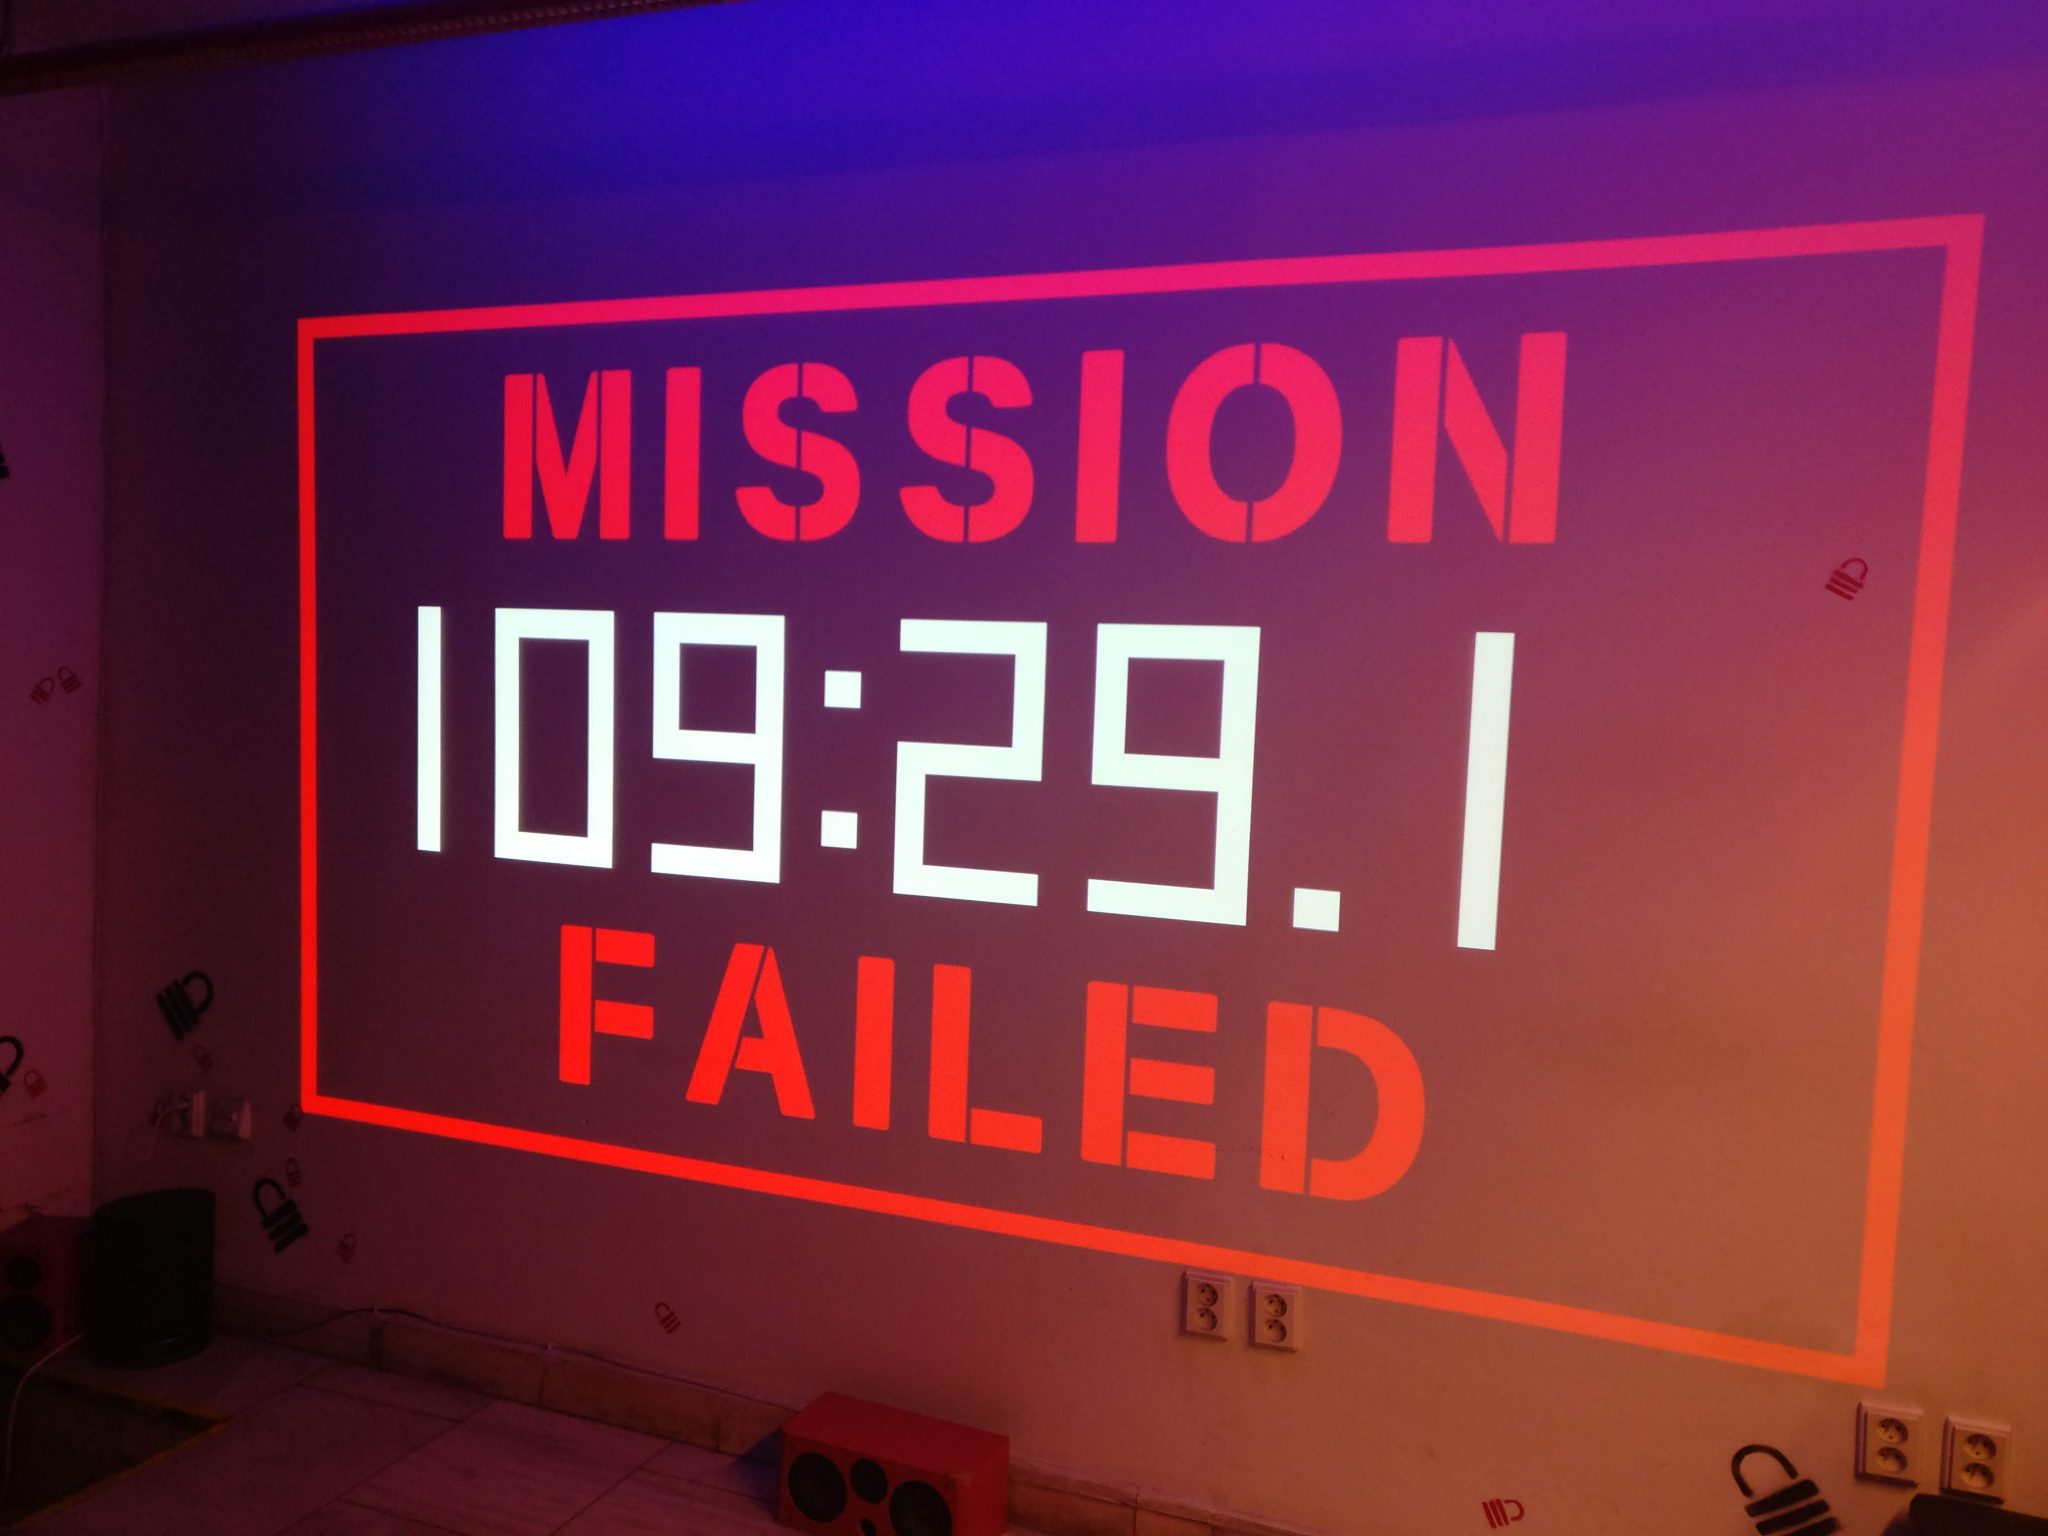 Our failure is projected onto the wall!